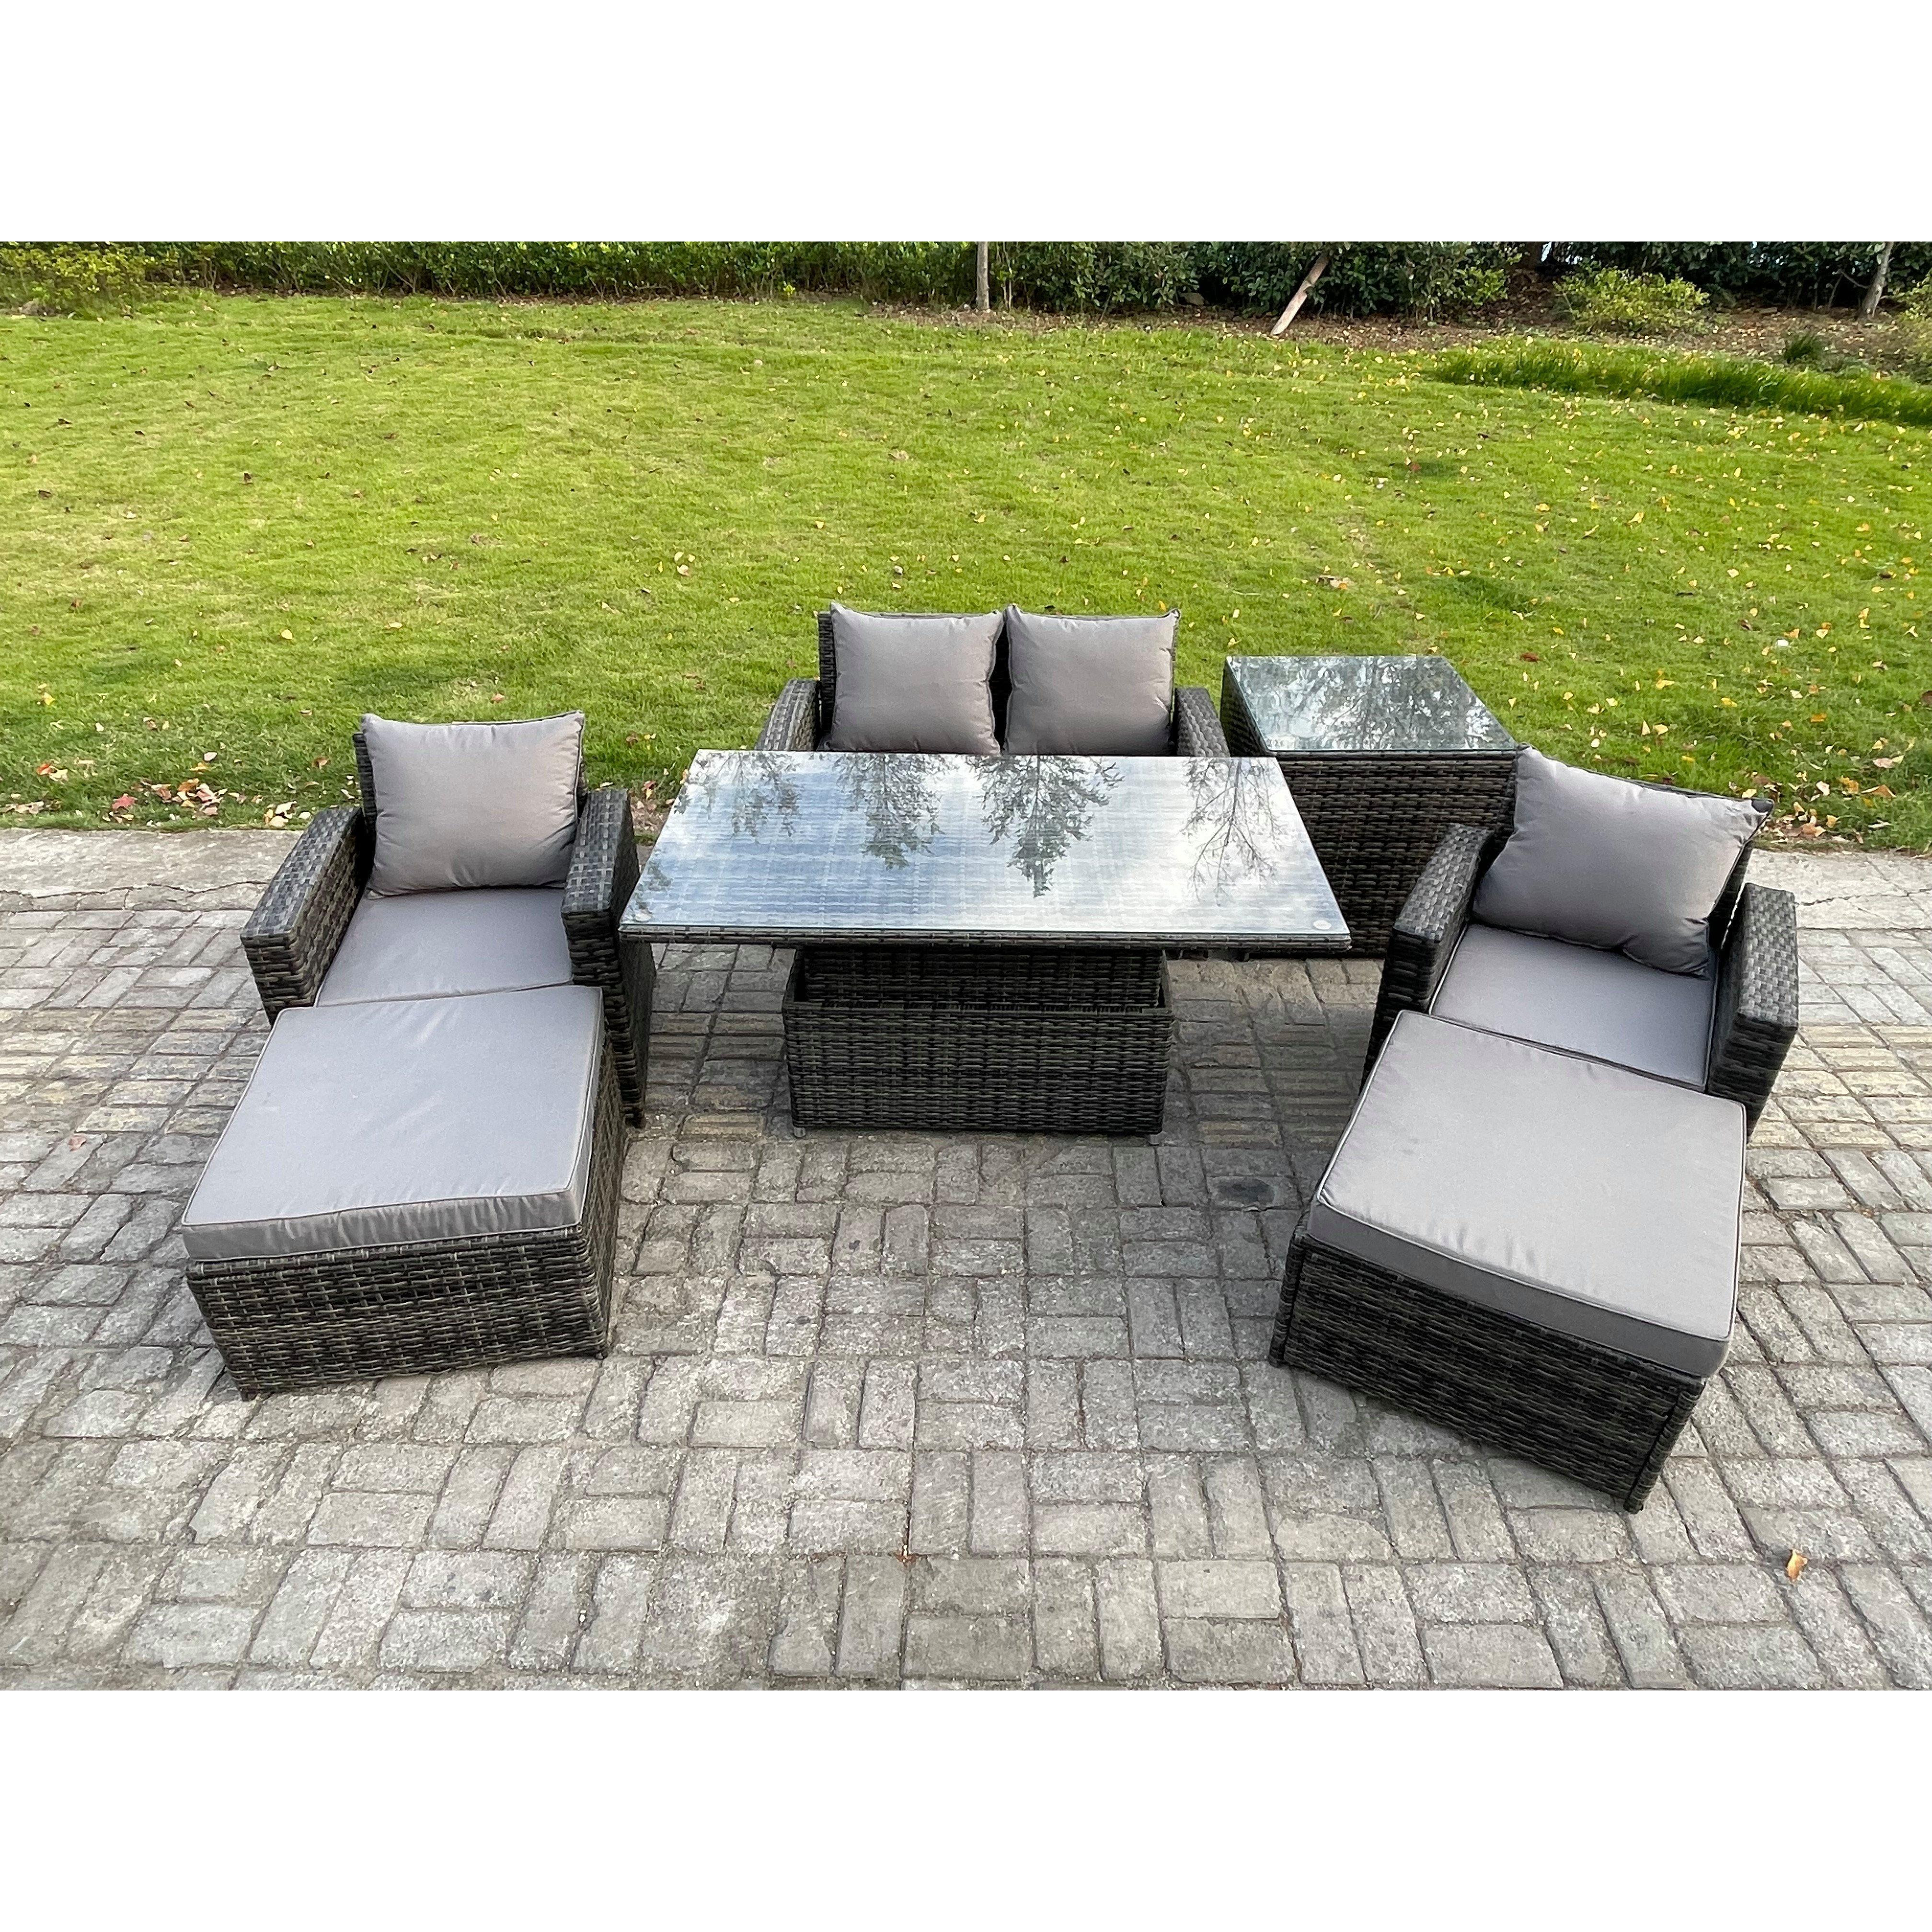 High Back Rattan Garden Furniture Sofa Sets with Height Adjustable Rising Lifting Table Side Table 2 Big Footstool - image 1